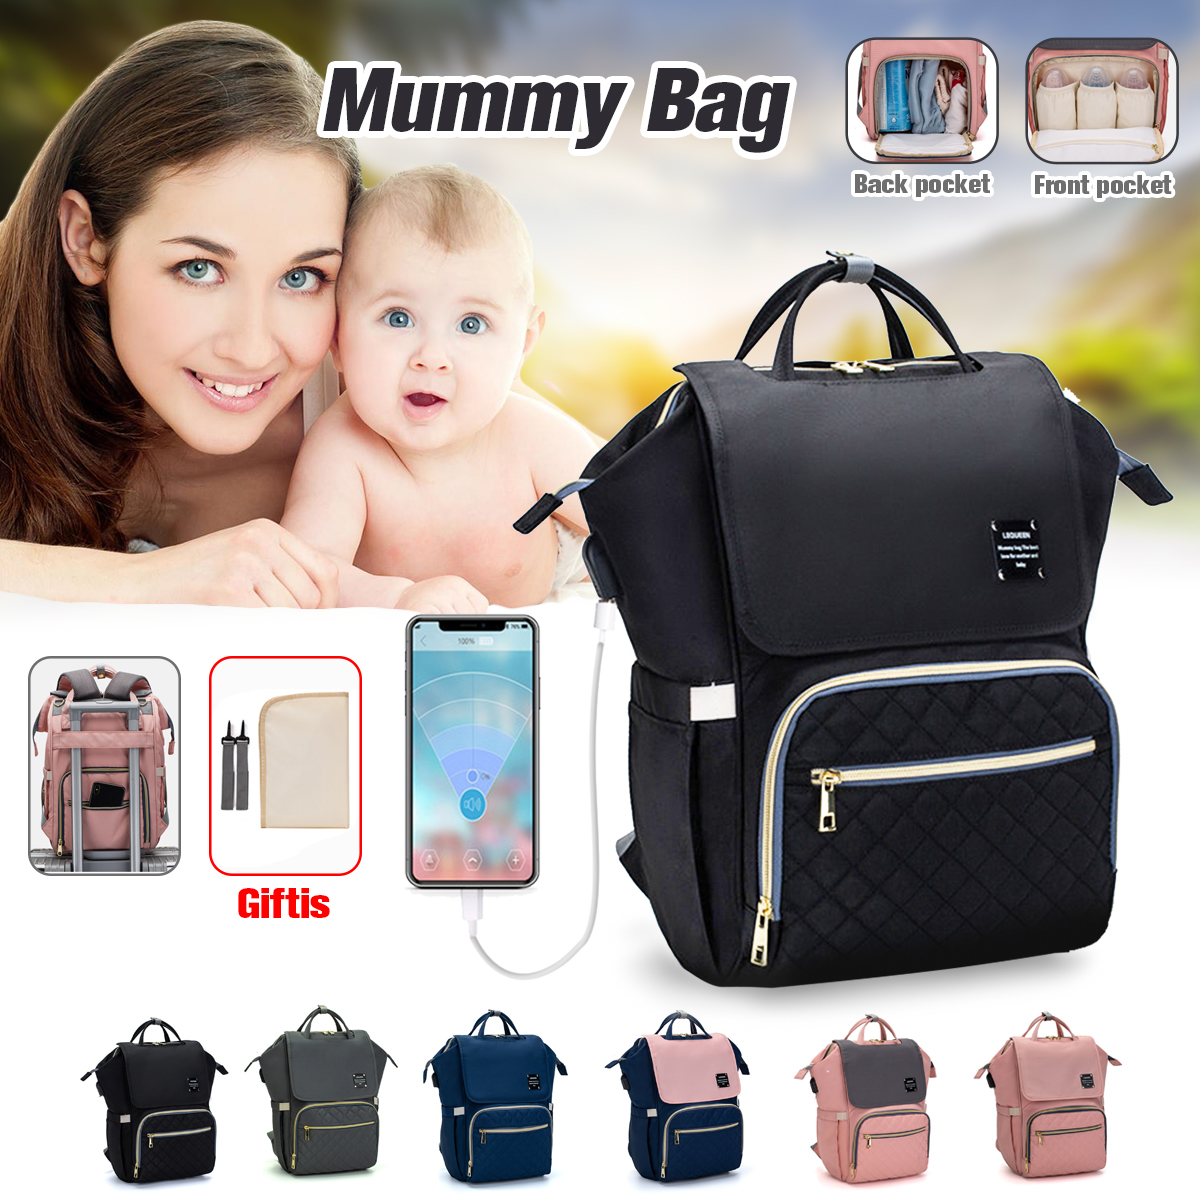 Upgrade-Version-LEQUEEN-Large-Capacity-Outdoor-Trip-Travel-Diaper-Storage-with-USB-Charging-Port-Mum-1861982-1